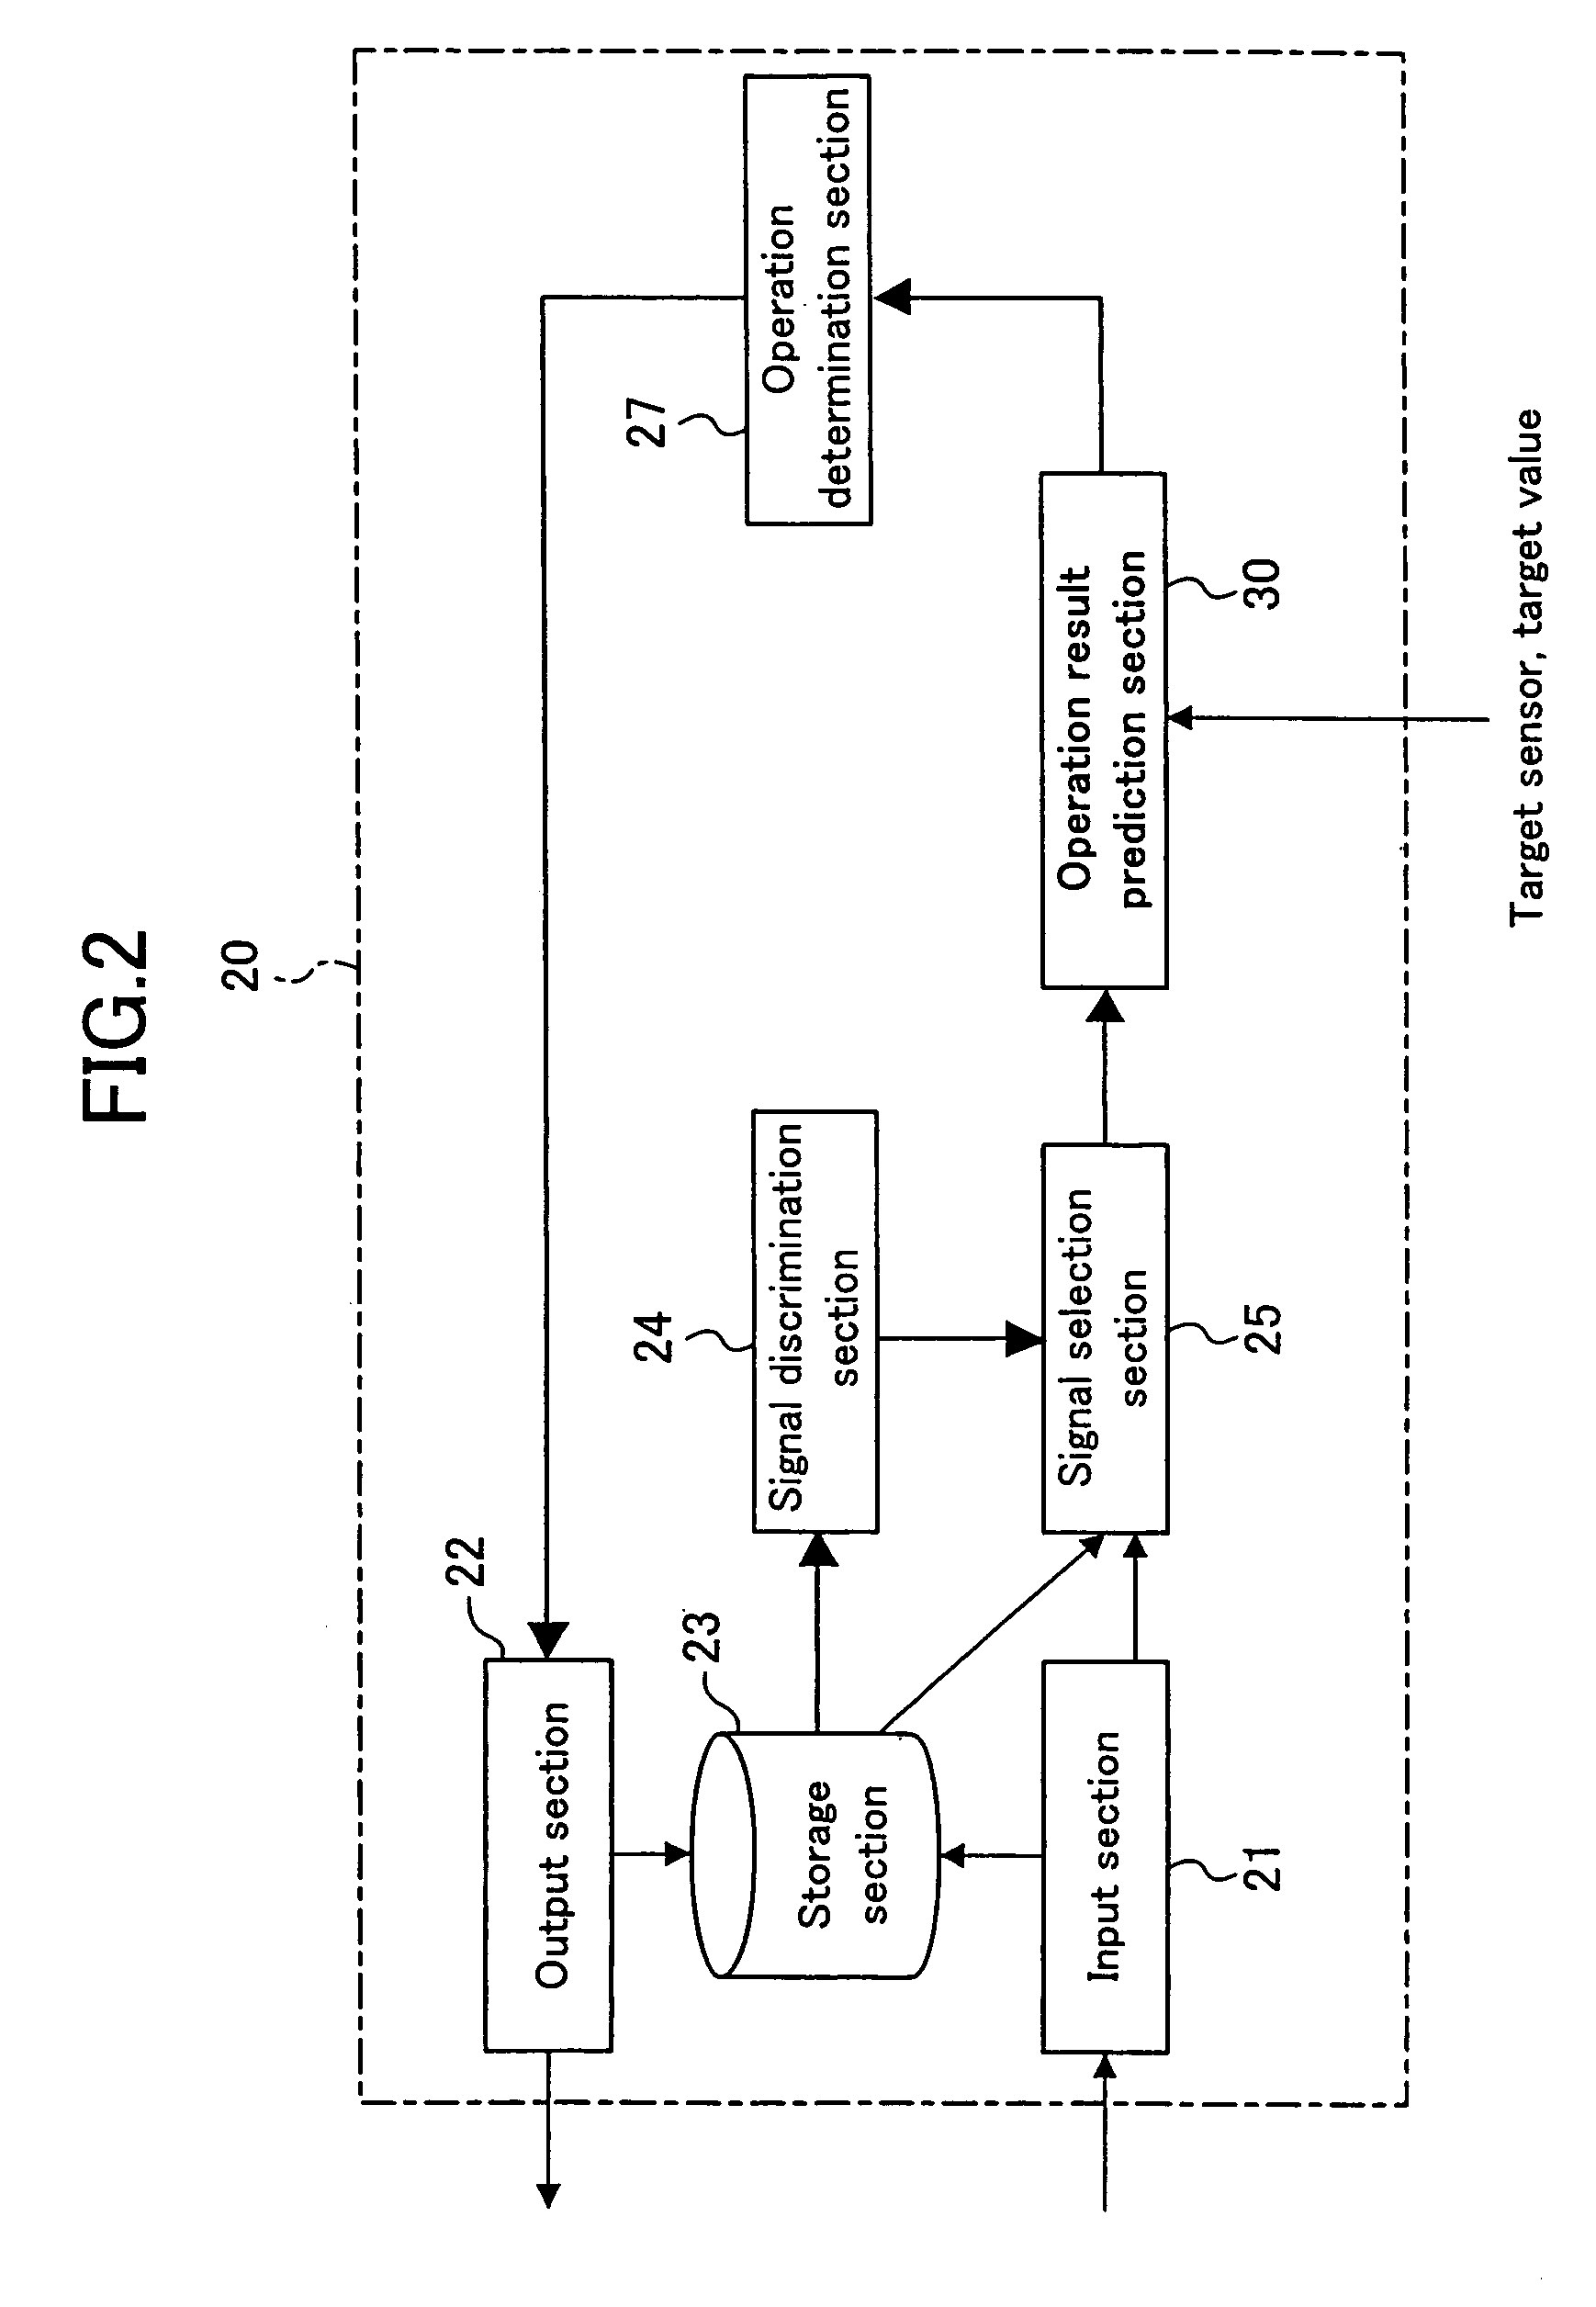 Device control method and device control system